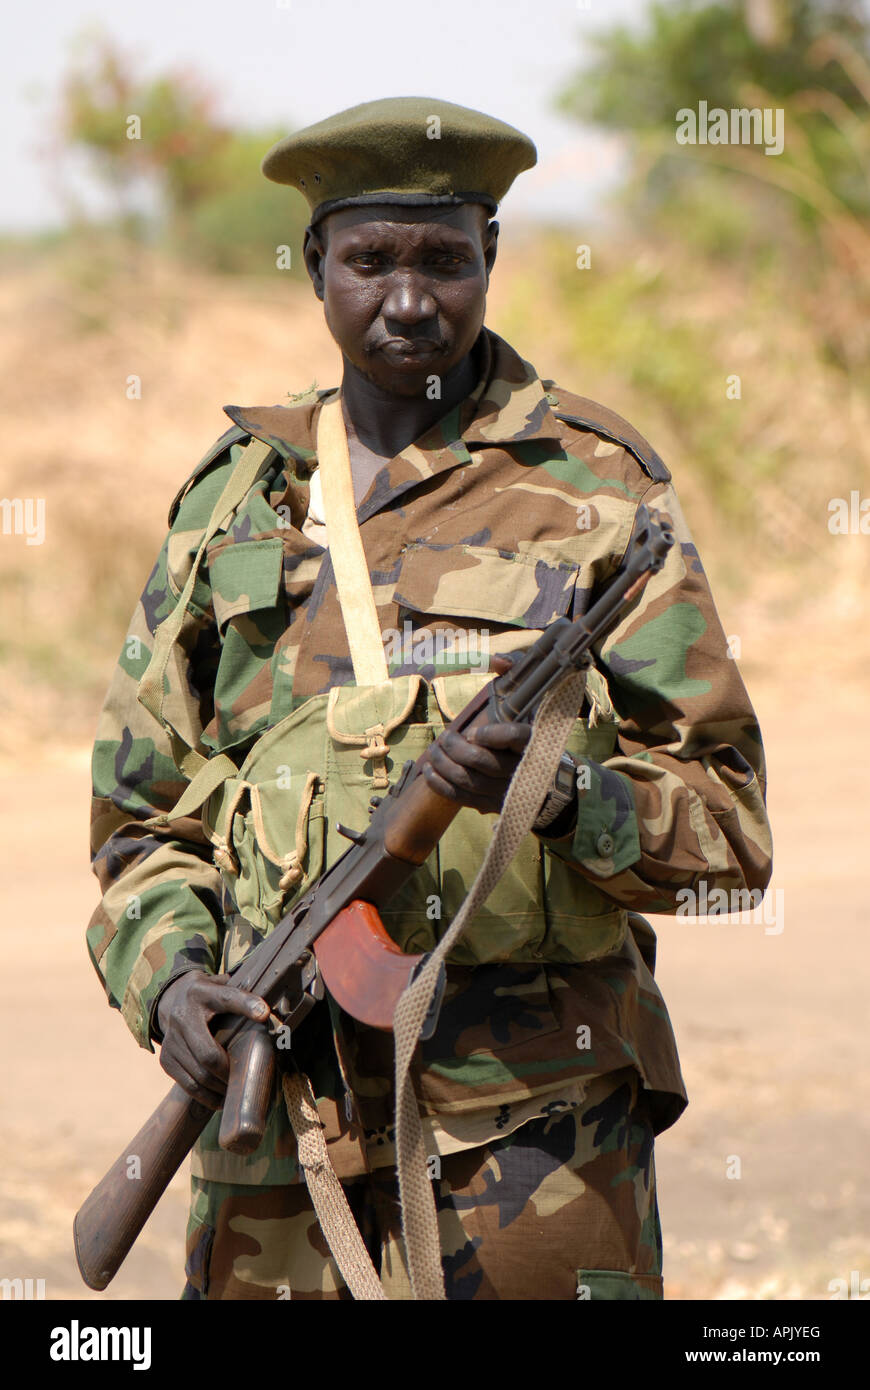 A soldier of the Sudan People's Liberation Army Stock Photo